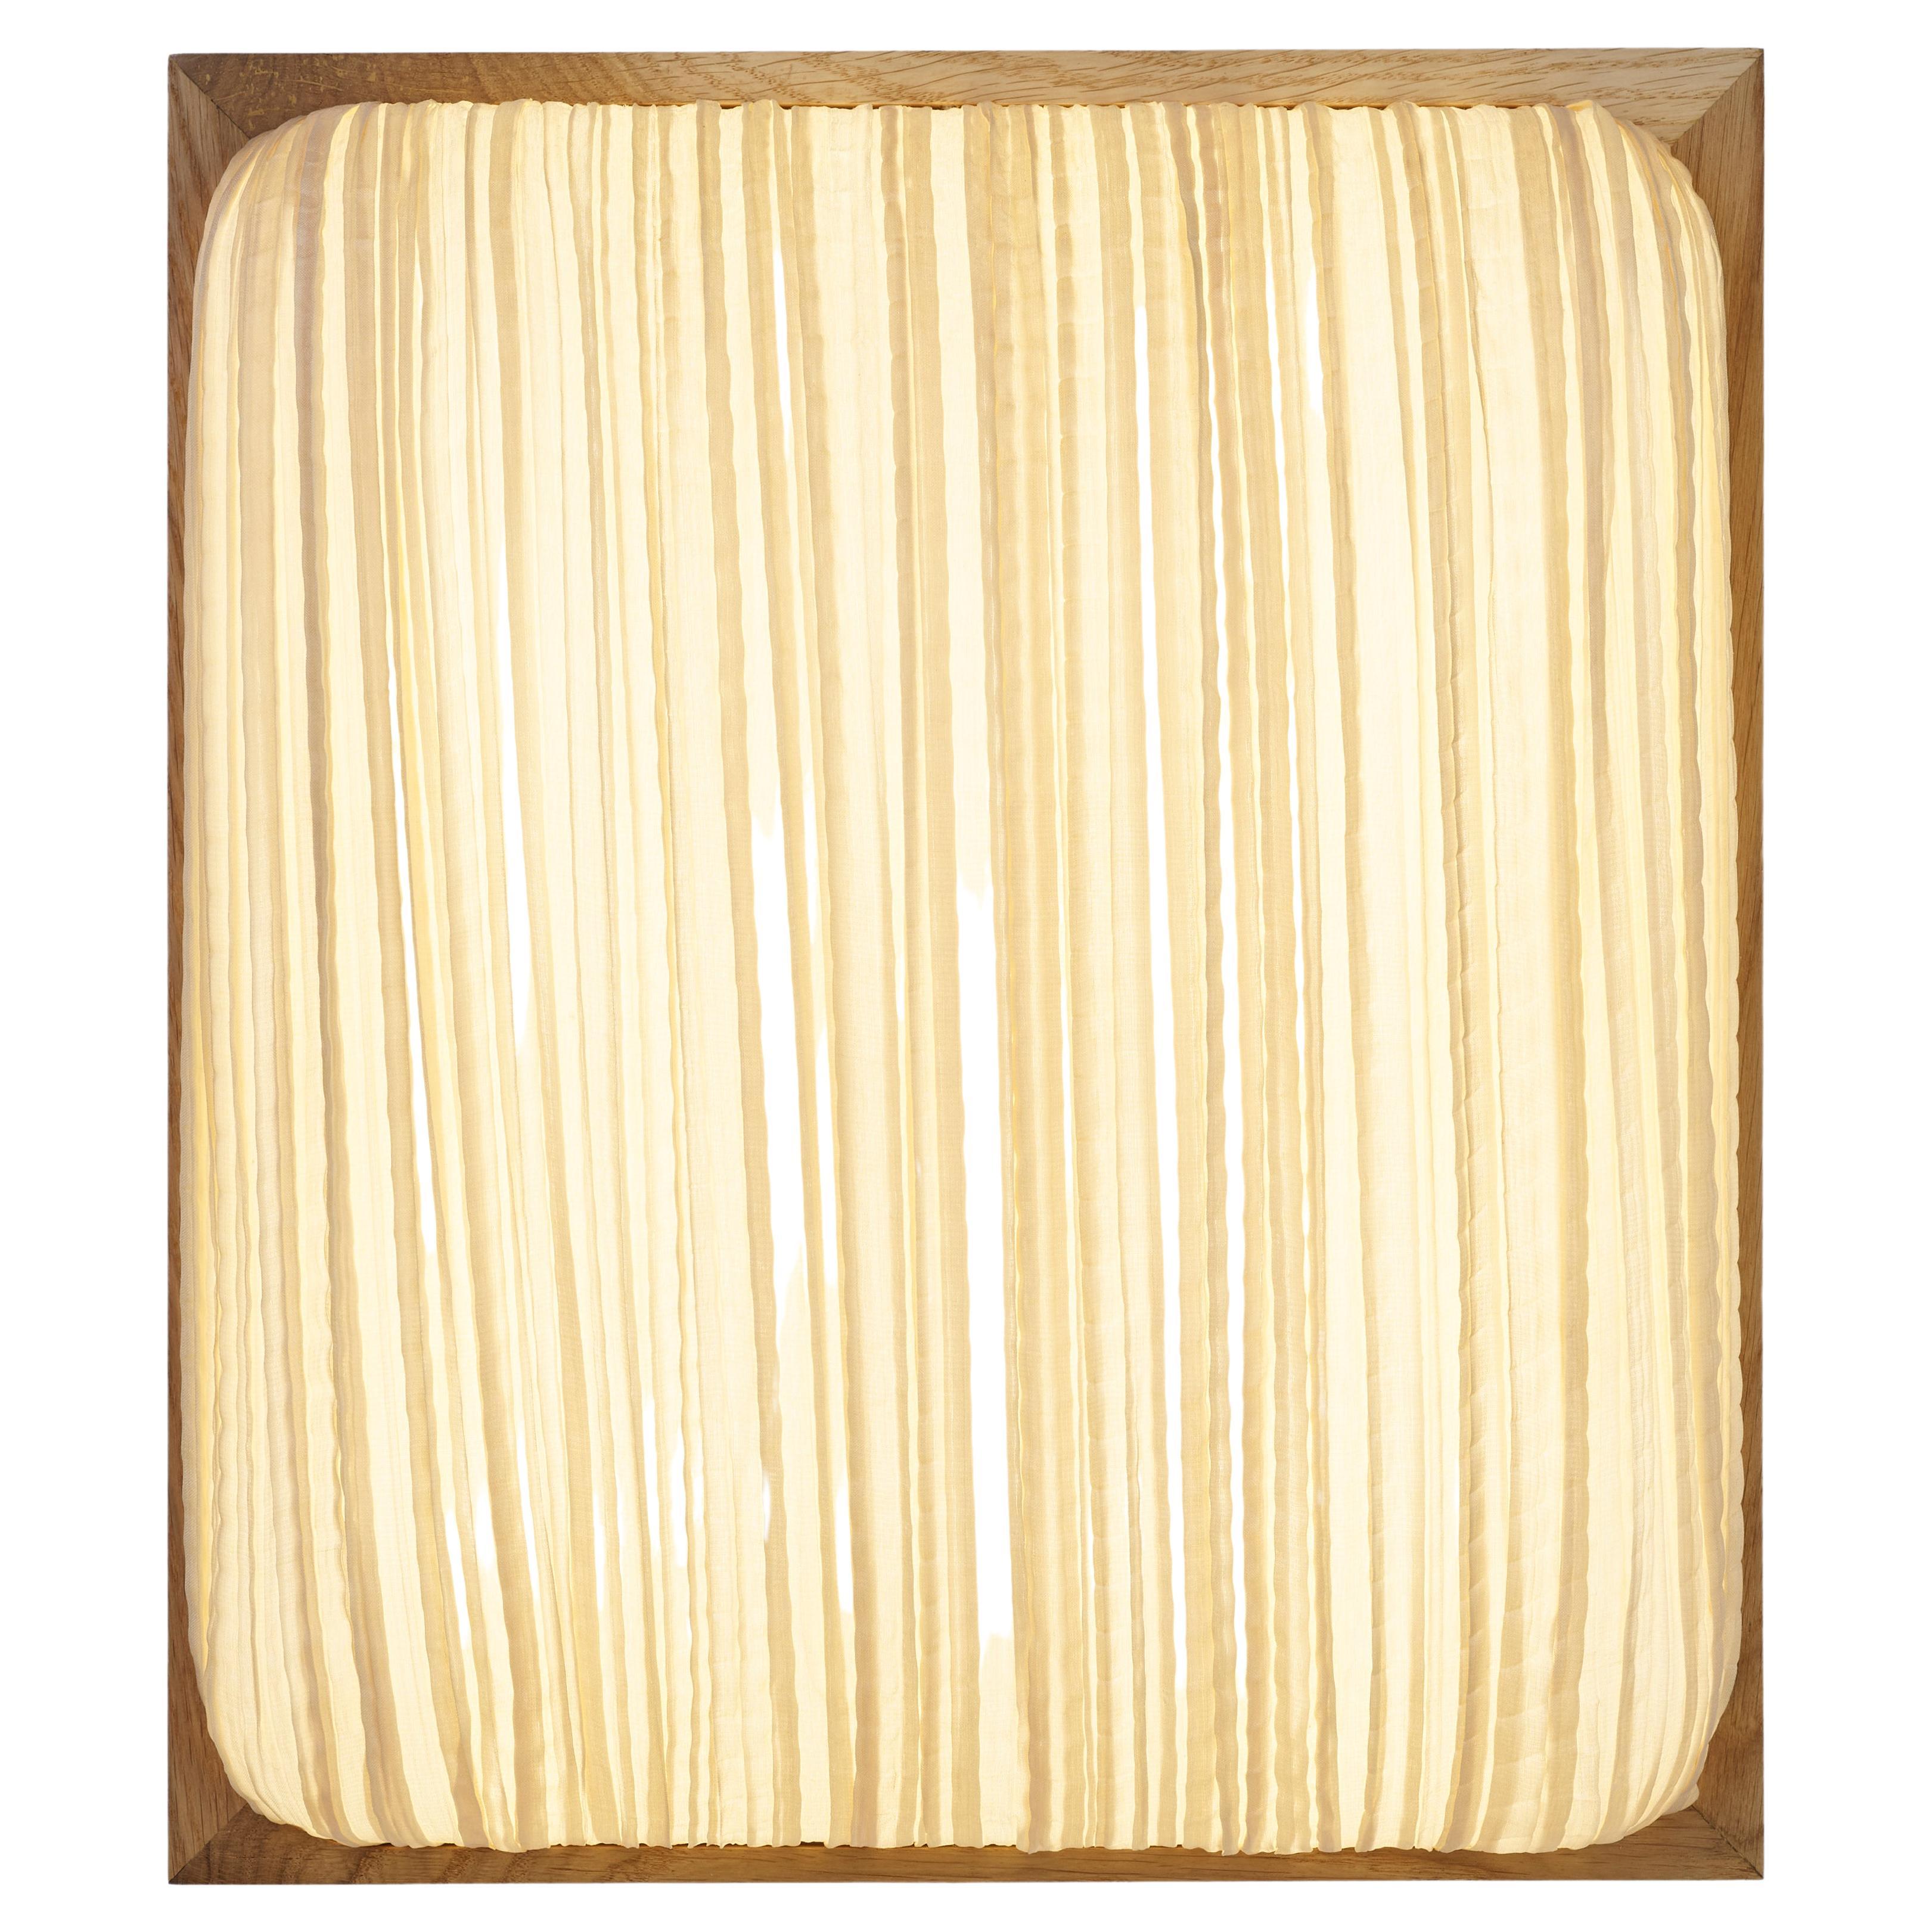 Silk and Mahogany "Simon Says Yes" Wall and Ceiling Lamp by Aqua Creations